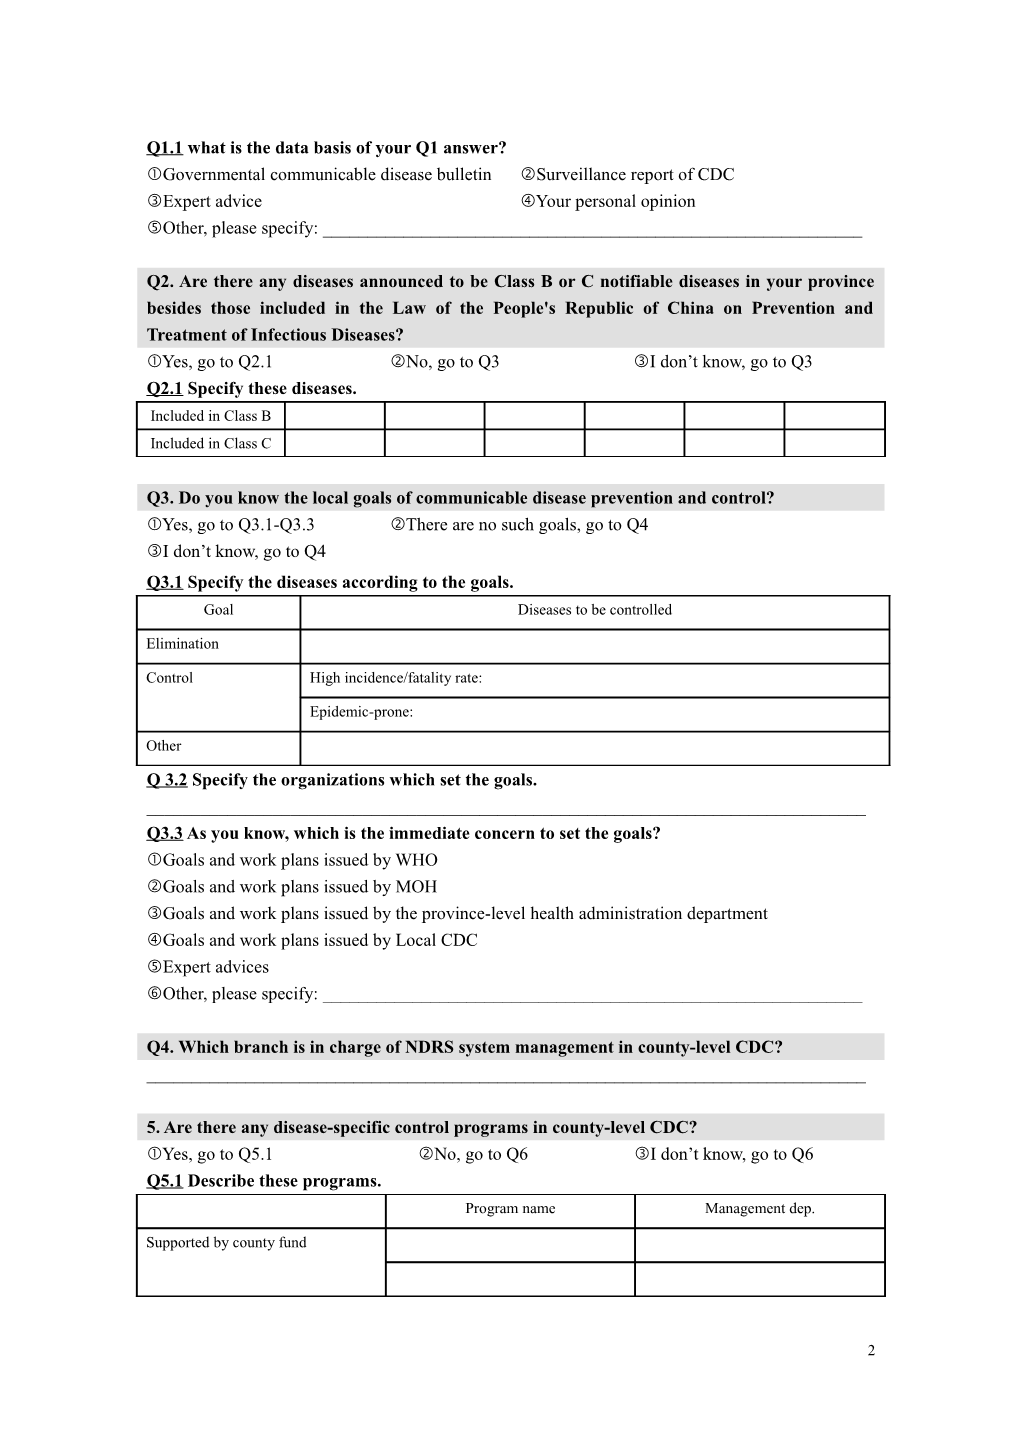 Questionnaire for Director of County-Level CDC